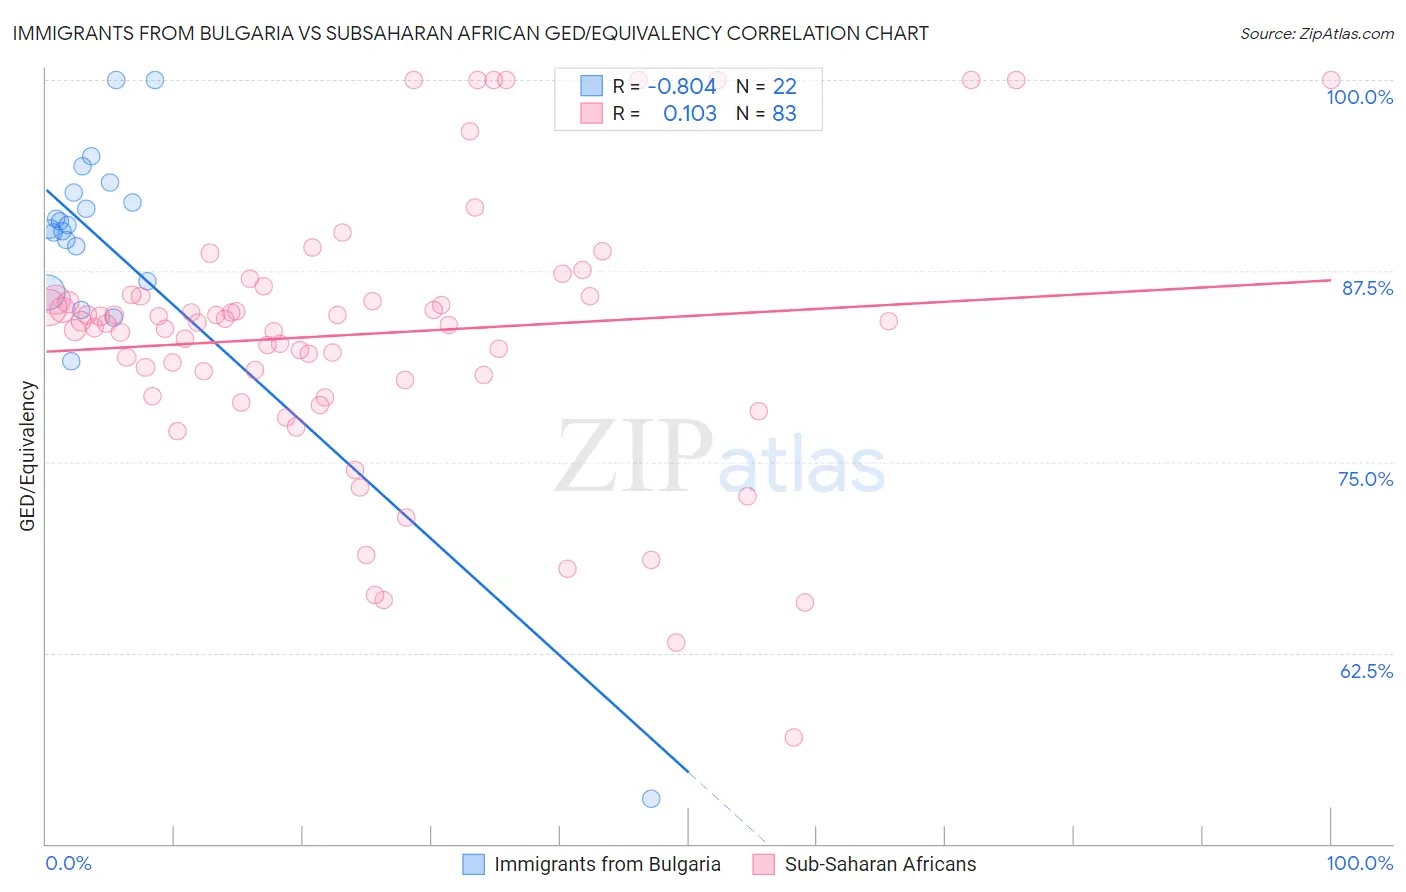 Immigrants from Bulgaria vs Subsaharan African GED/Equivalency